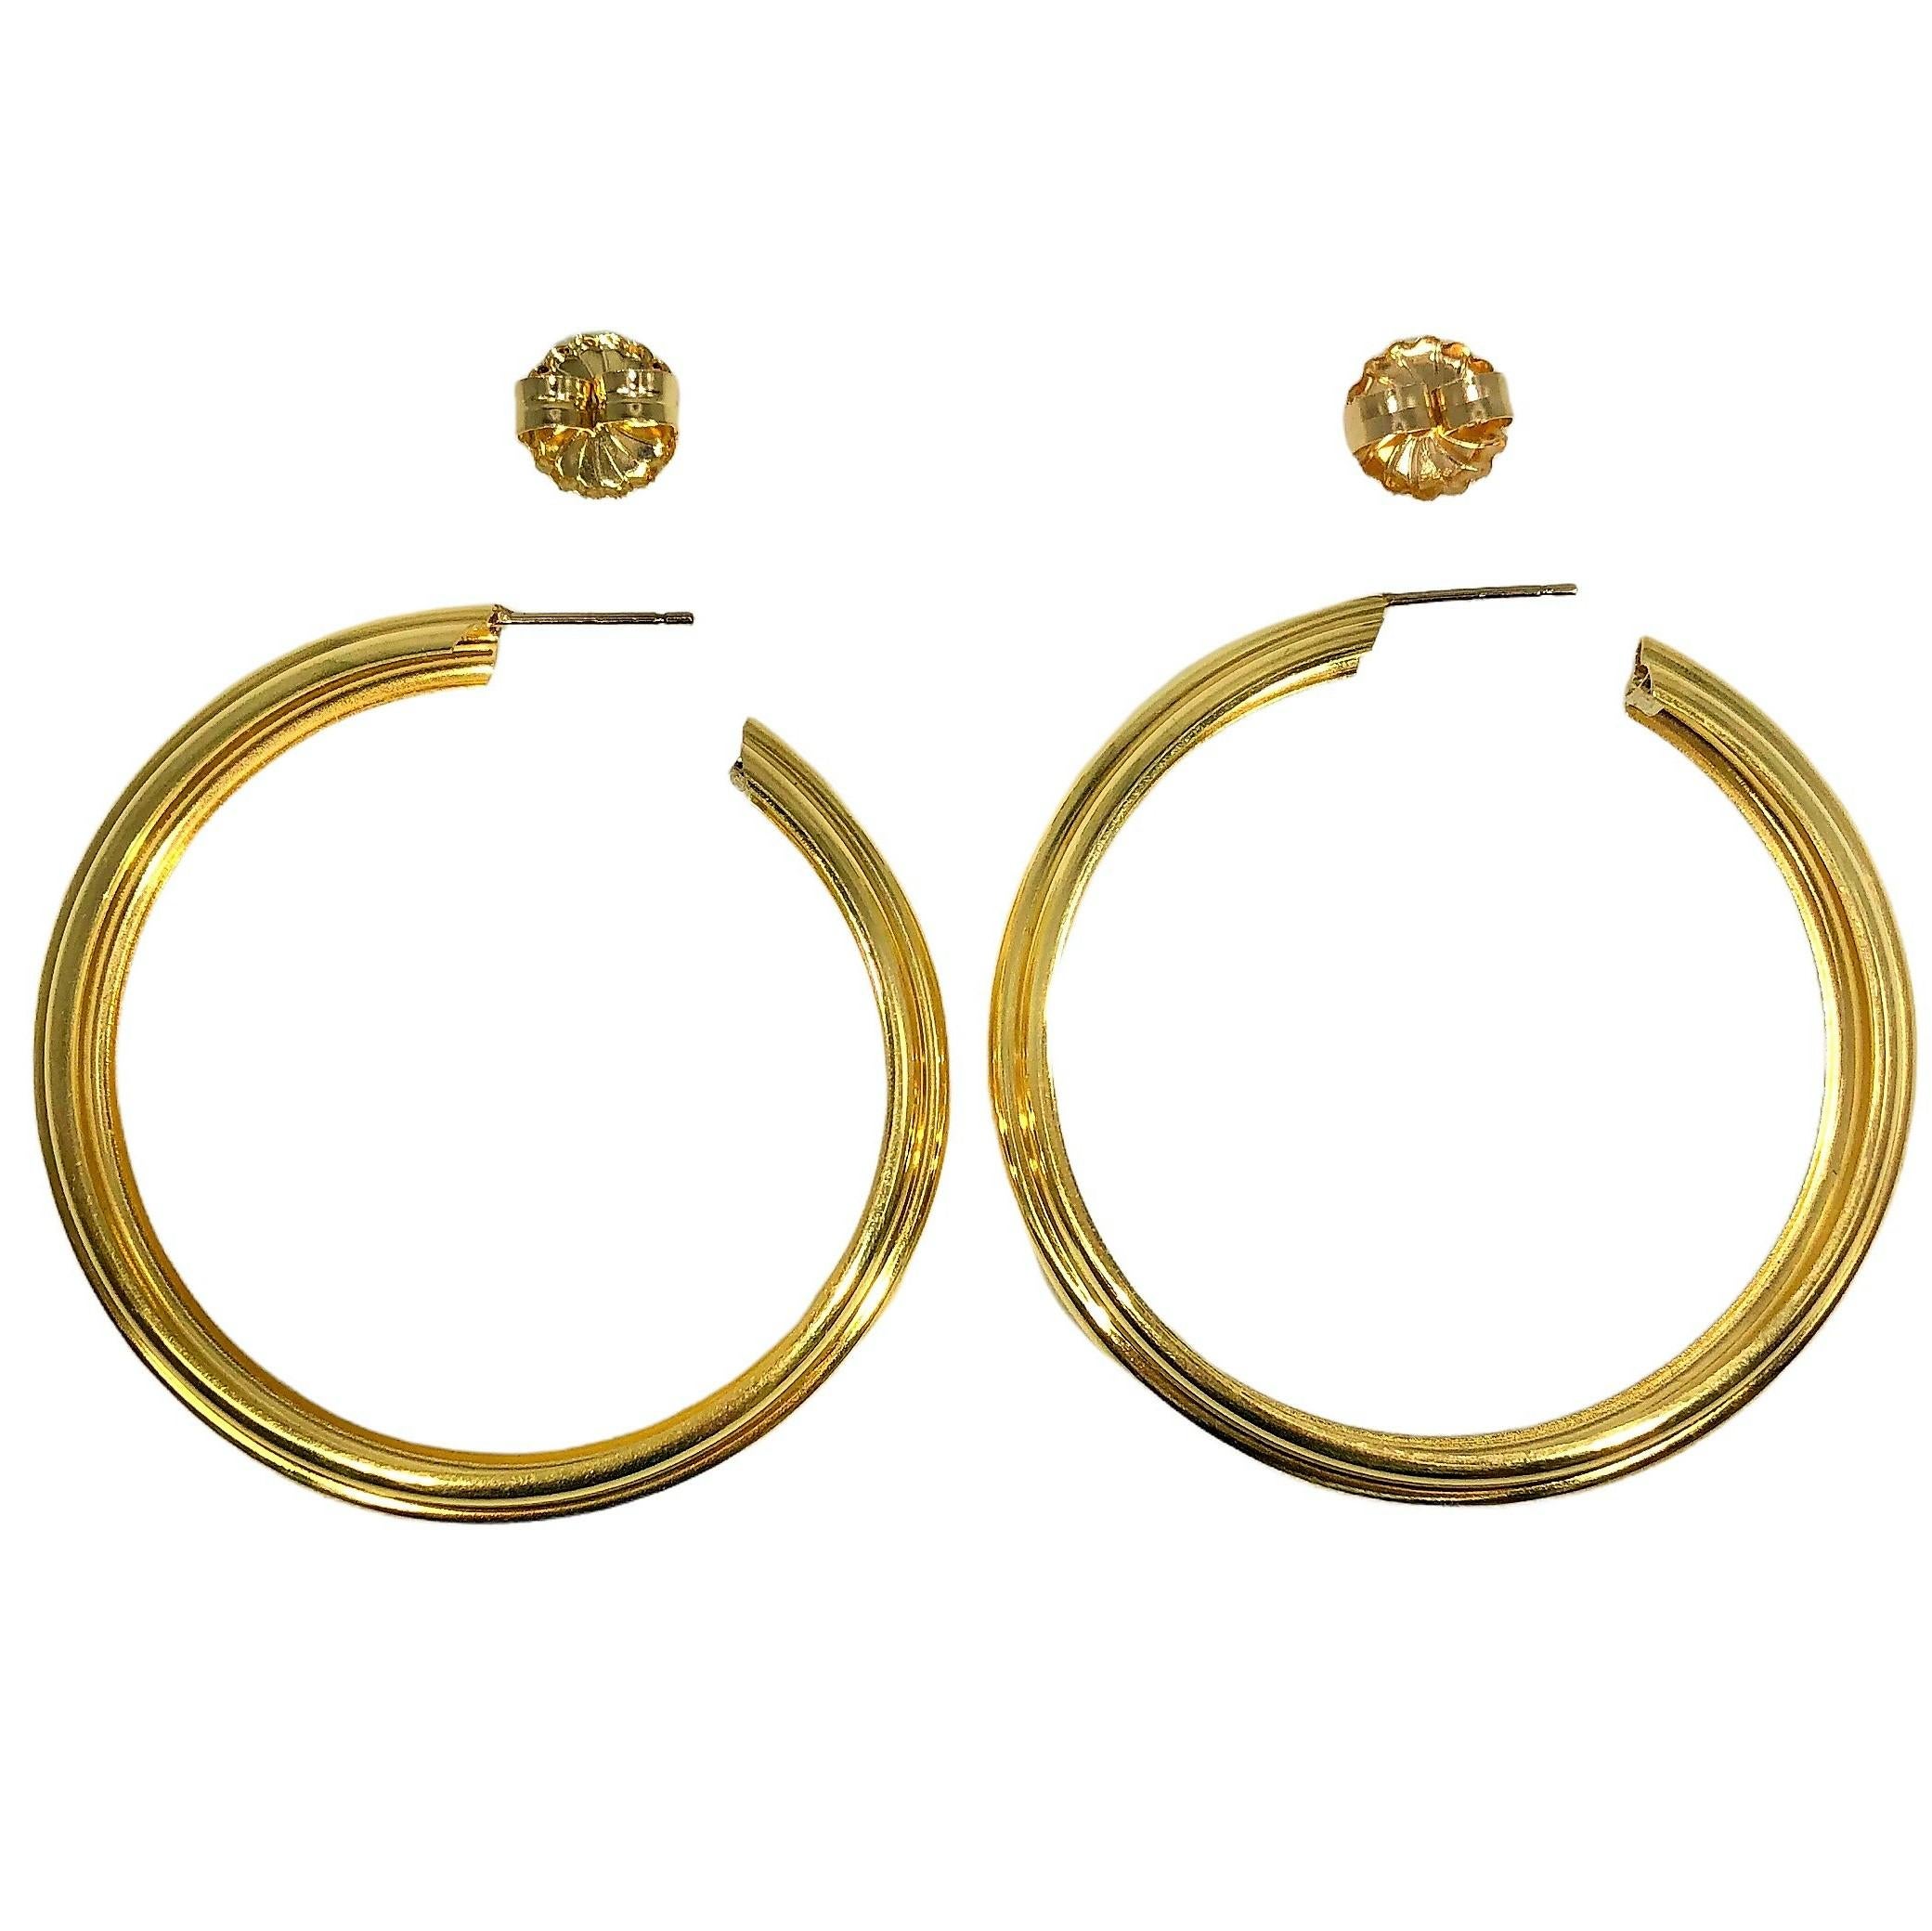 Lightweight yet sturdy, this unique pair of 18k yellow gold Italian hoop earrings is quite large, measuring a full 2 inches in diameter by 3/8 inch wide. The fluted design sets these apart from other styles of hoop earrings. The hoops are 18K gold